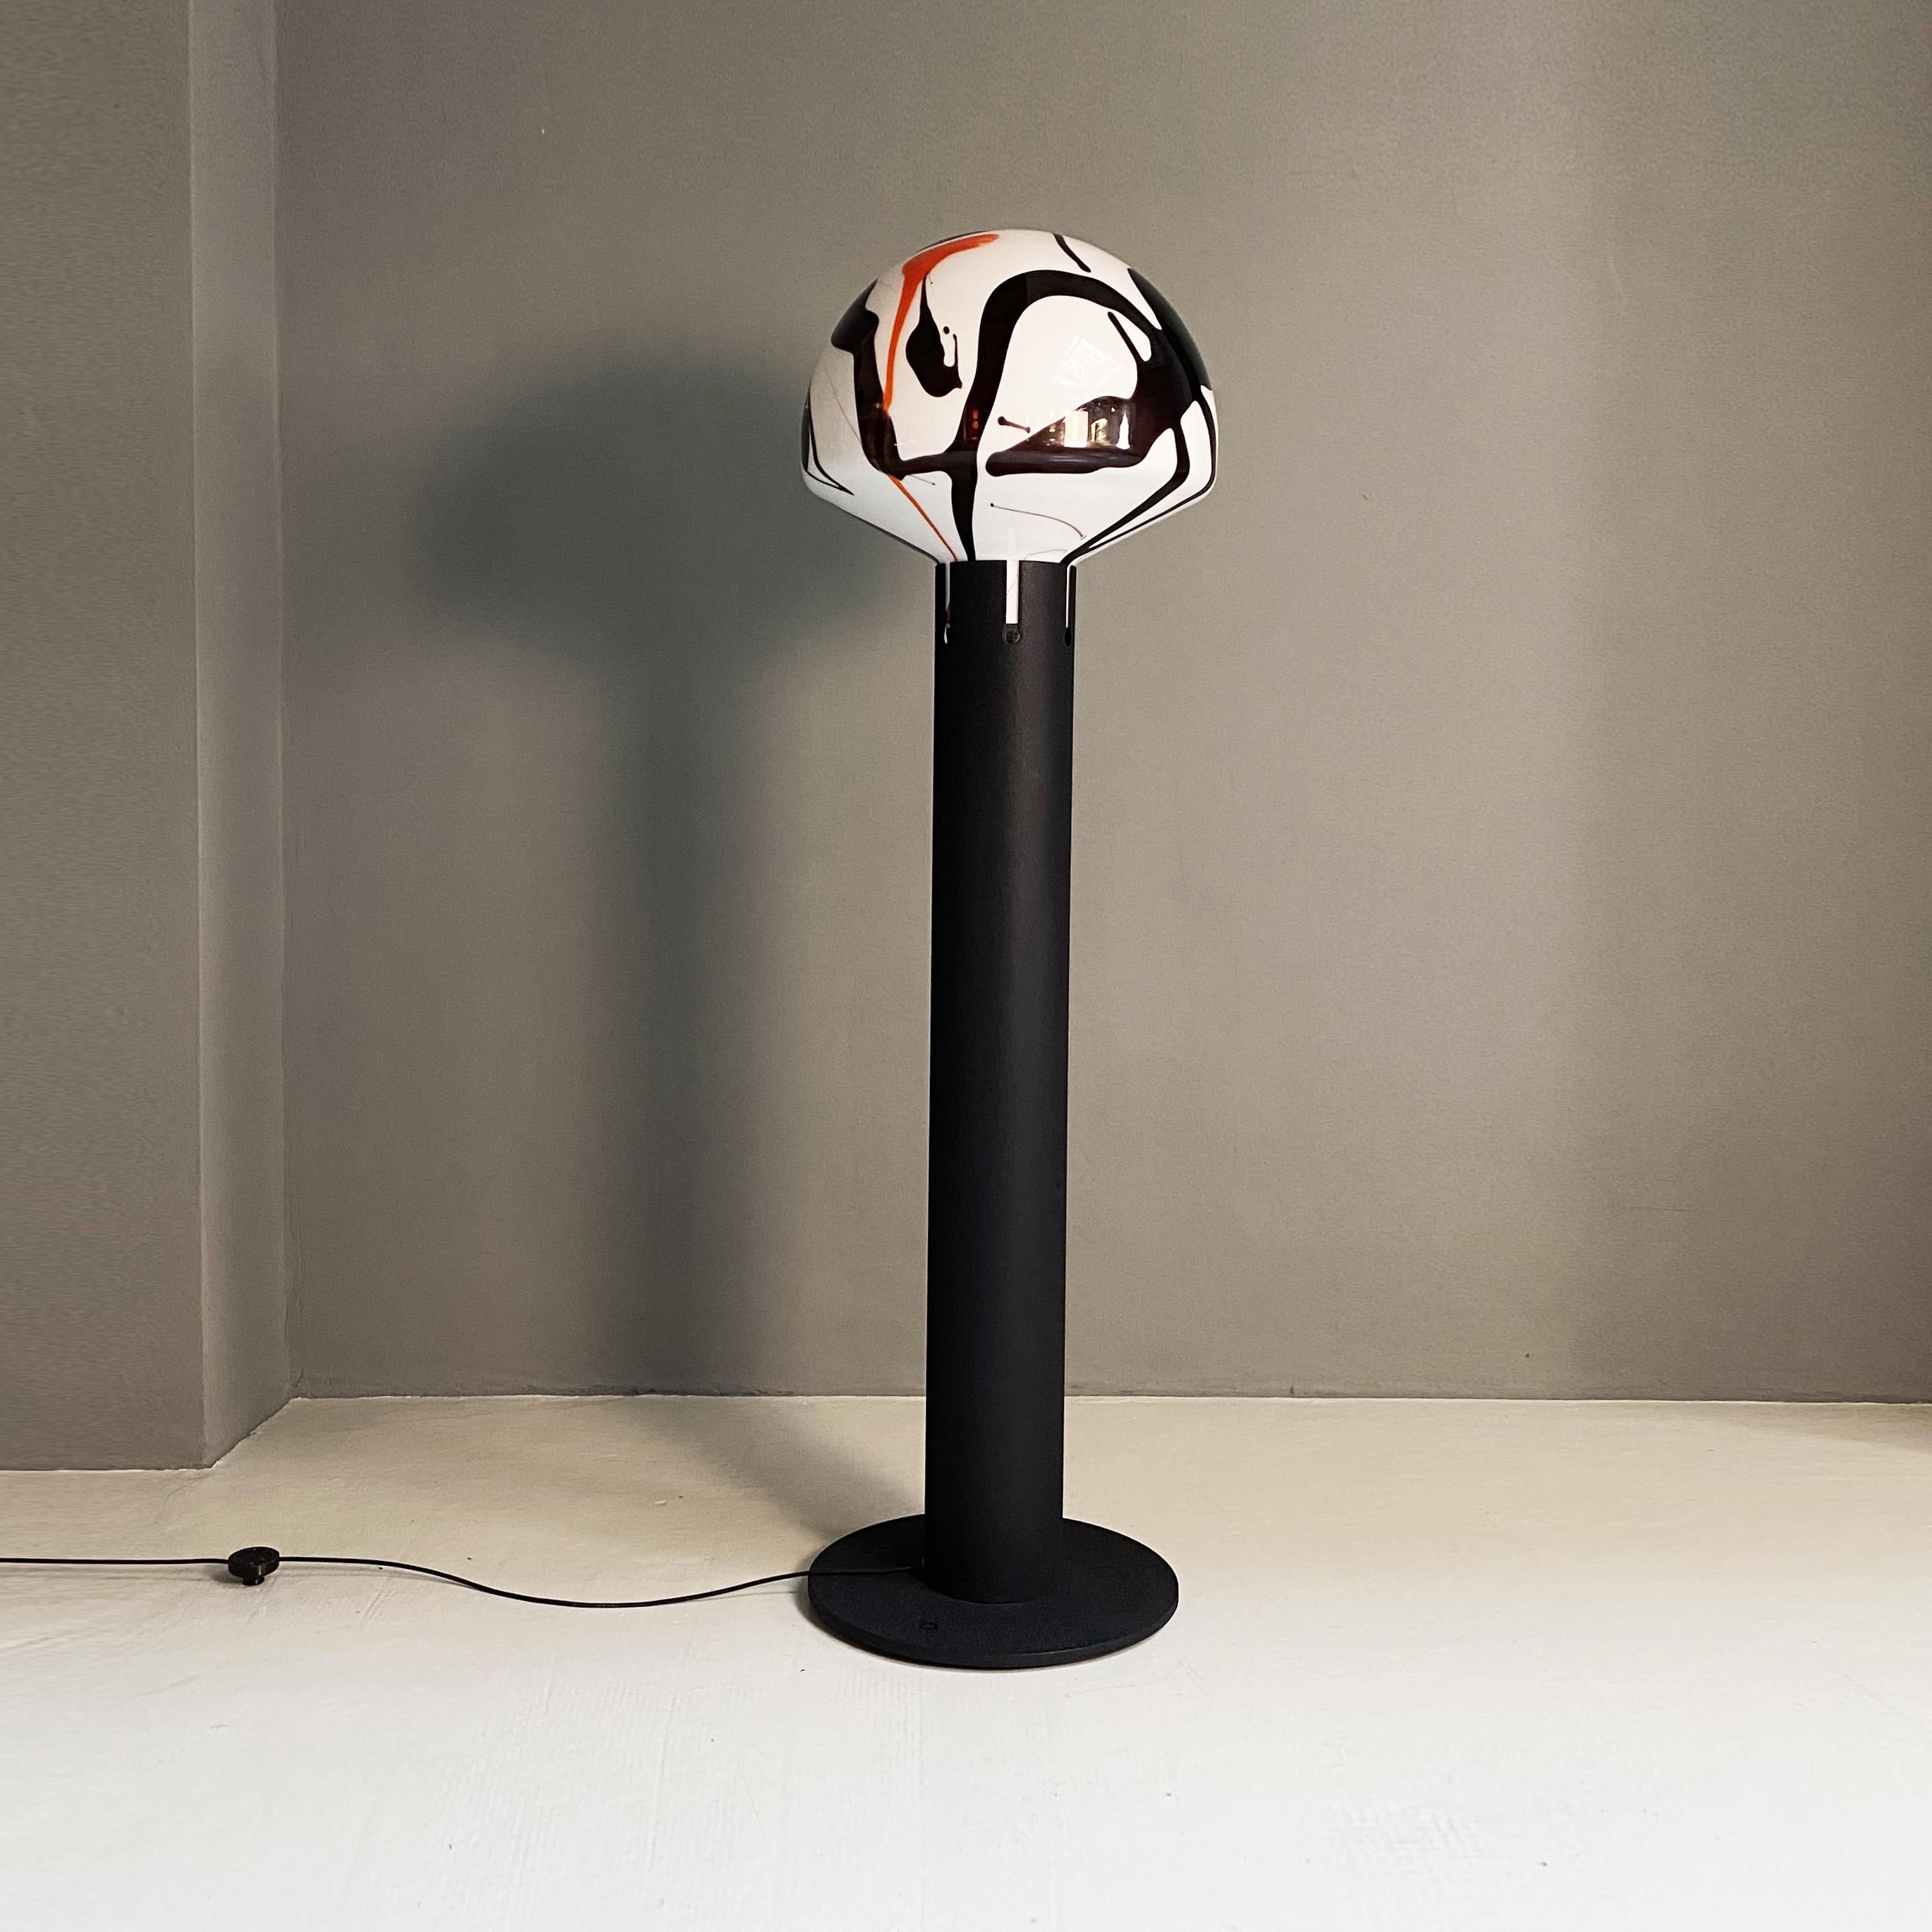 Italian Mid-Century Modern floor lamp with decorated Murano glass, 1970s.

Fantastic and beautiful 1970s period, floor lamp, with black painted metal structure in 